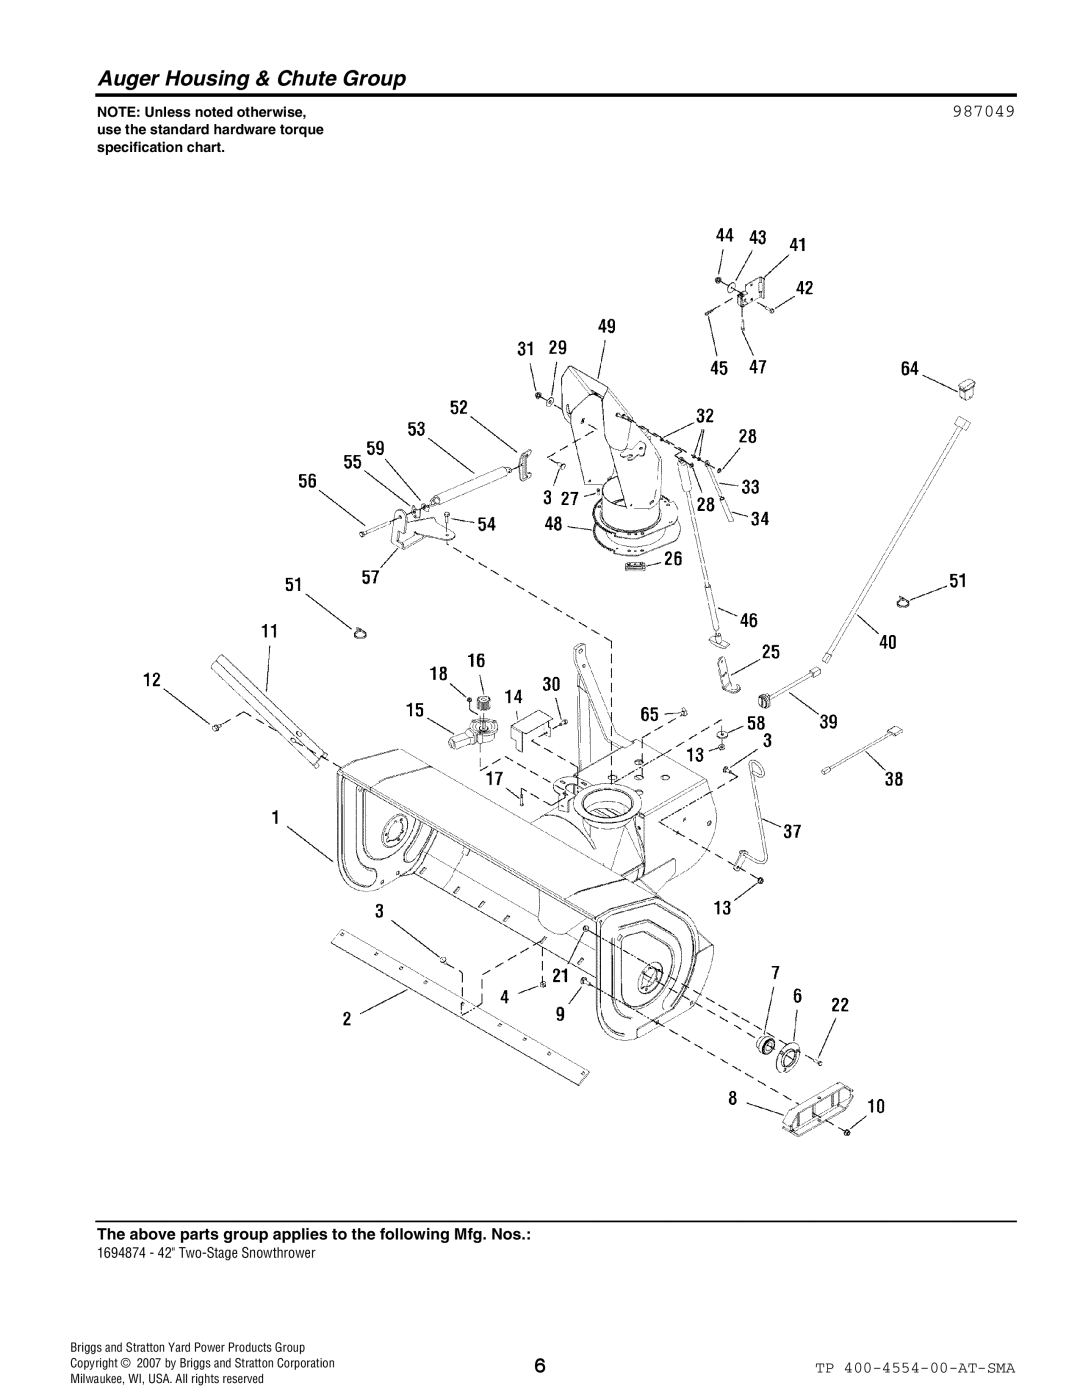 Simplicity 1694874 manual Auger Housing & Chute Group, 987049, NOTE Unless noted otherwise 